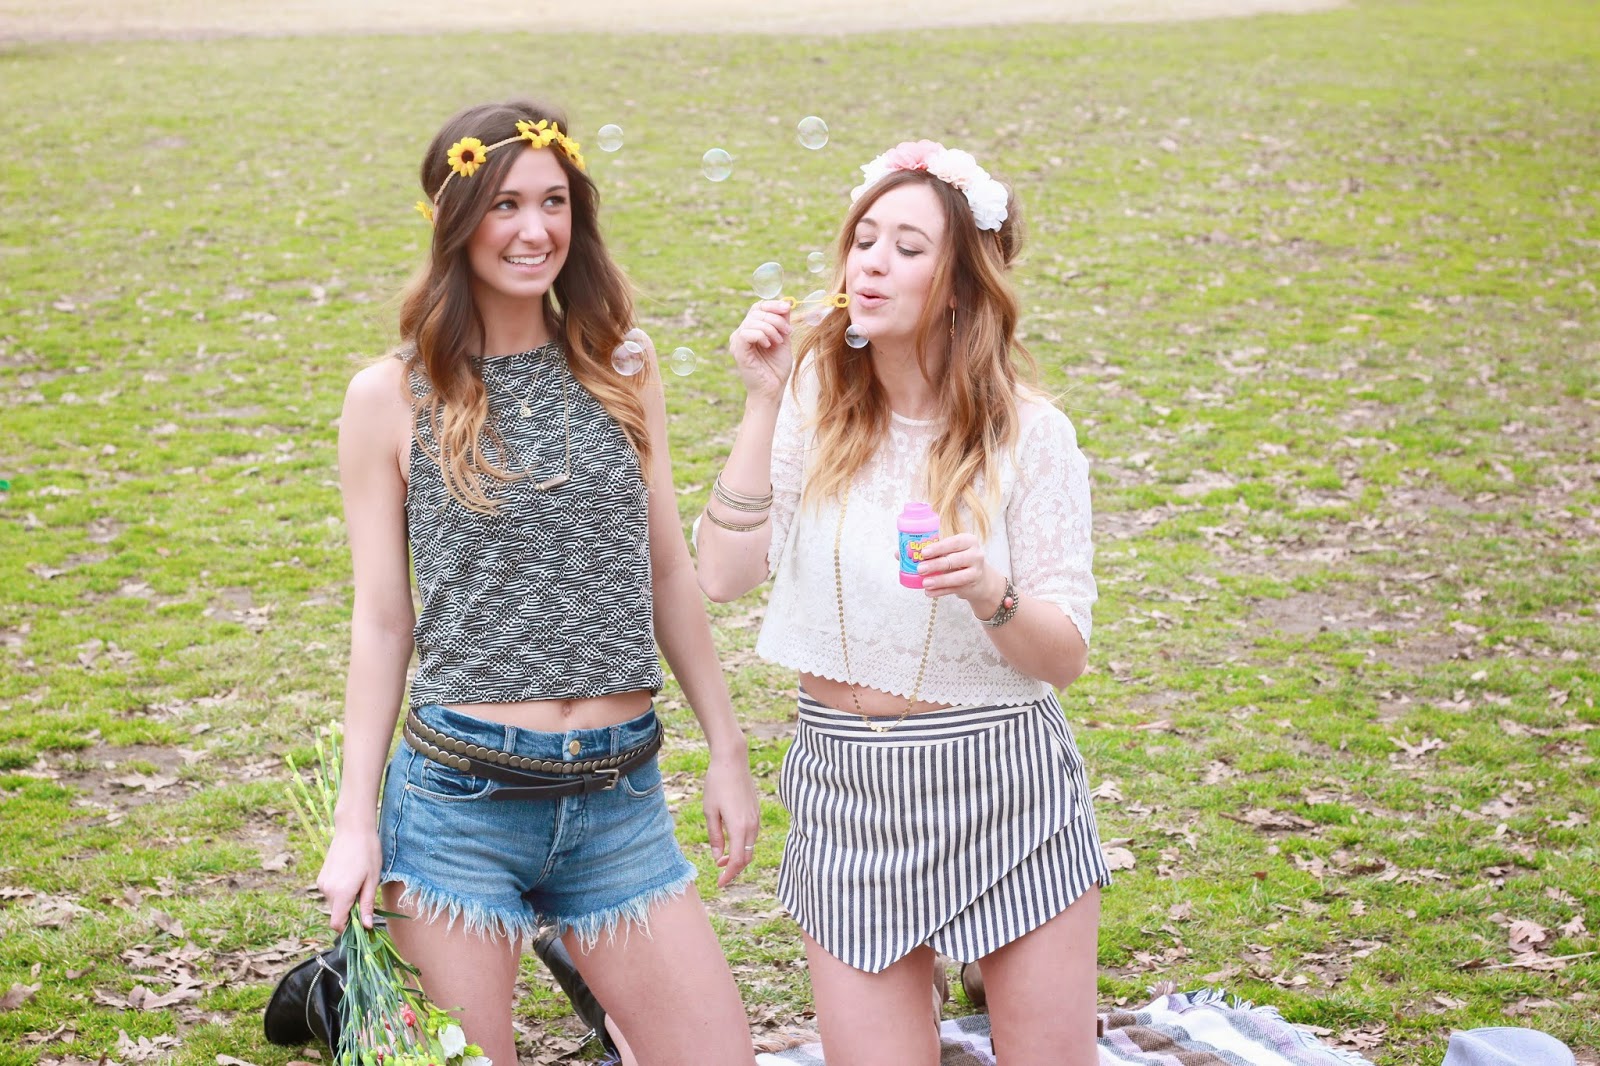 festival style, festival fashion, festival outfit inspiration and ideas, south moon under, bloggers, sisters, coachella style